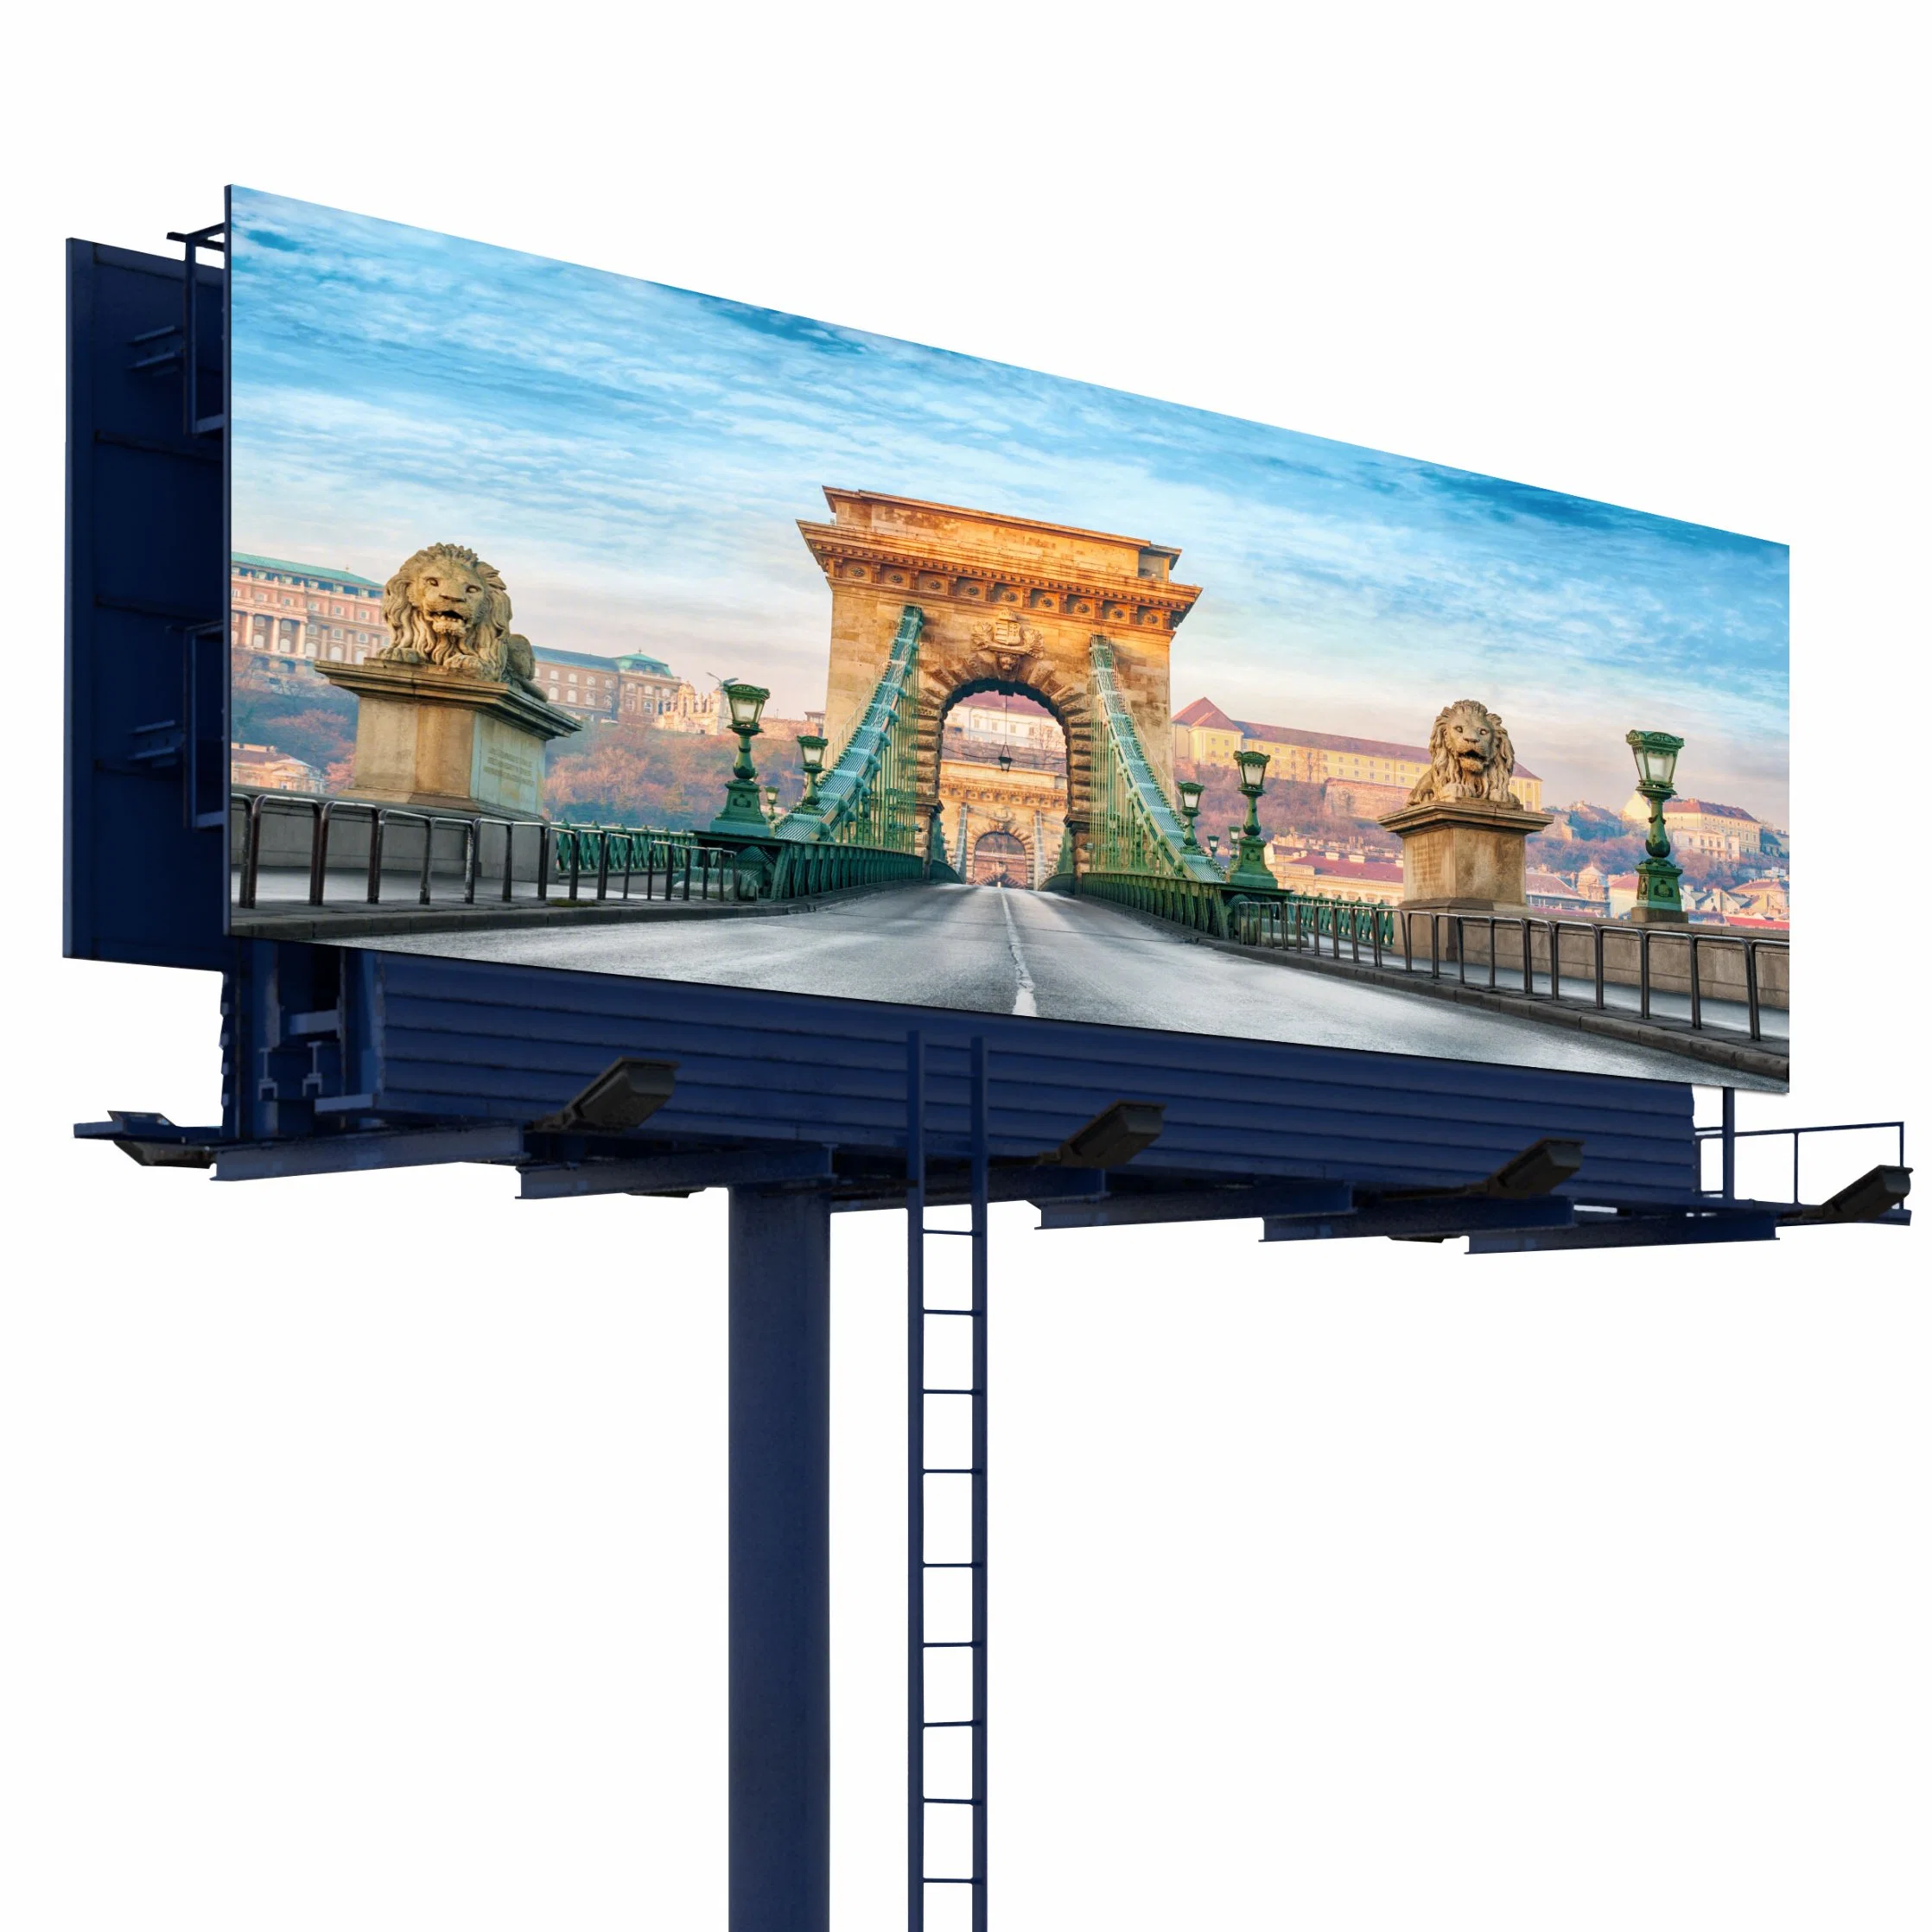 Giant Digital Billboard Full Color LED Display Panel SMD Outdoor P5 P6 P8 P10 for Advertising Rental Video Wall Big Display